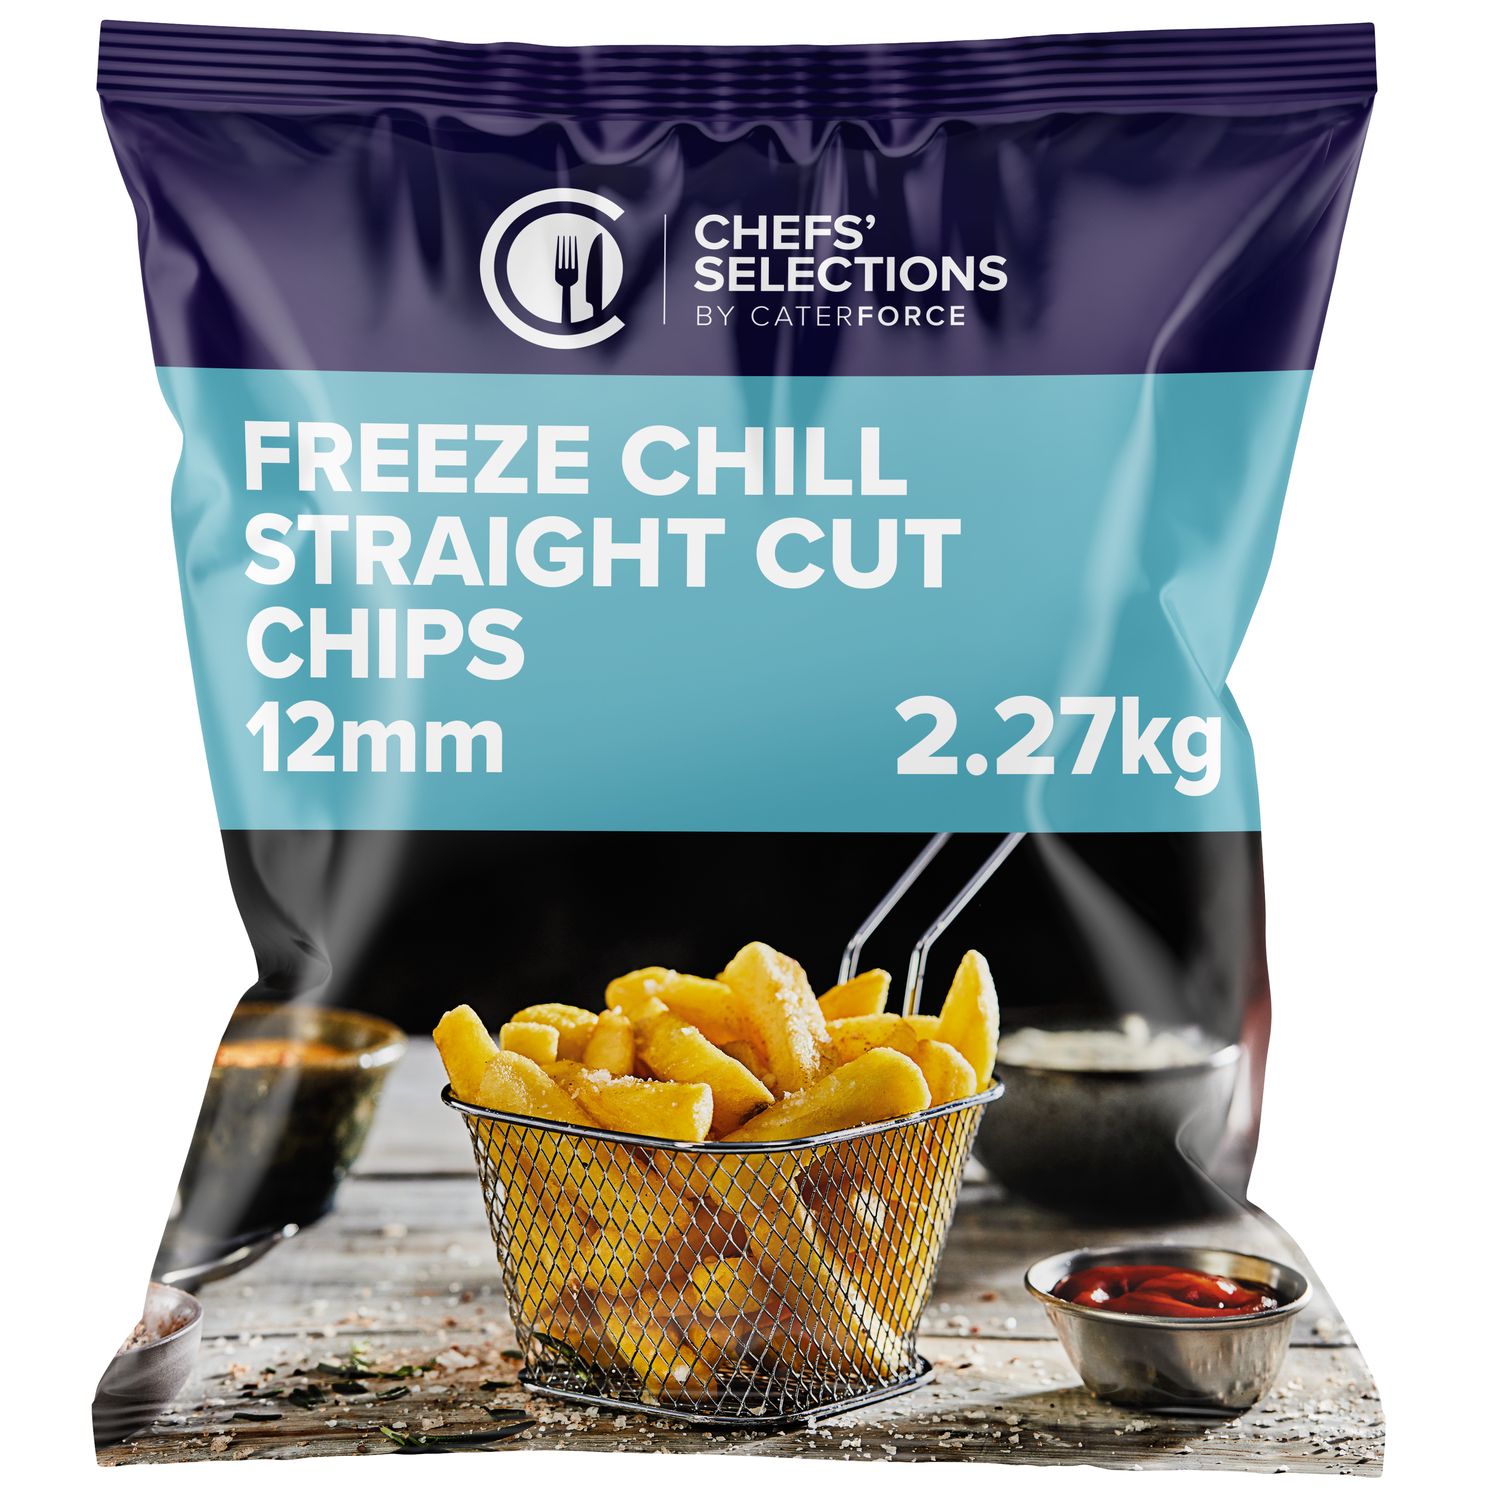 Chefs’ Selections Freeze Chill Straight Cut 12mm Chips (4 x 2.27kg)